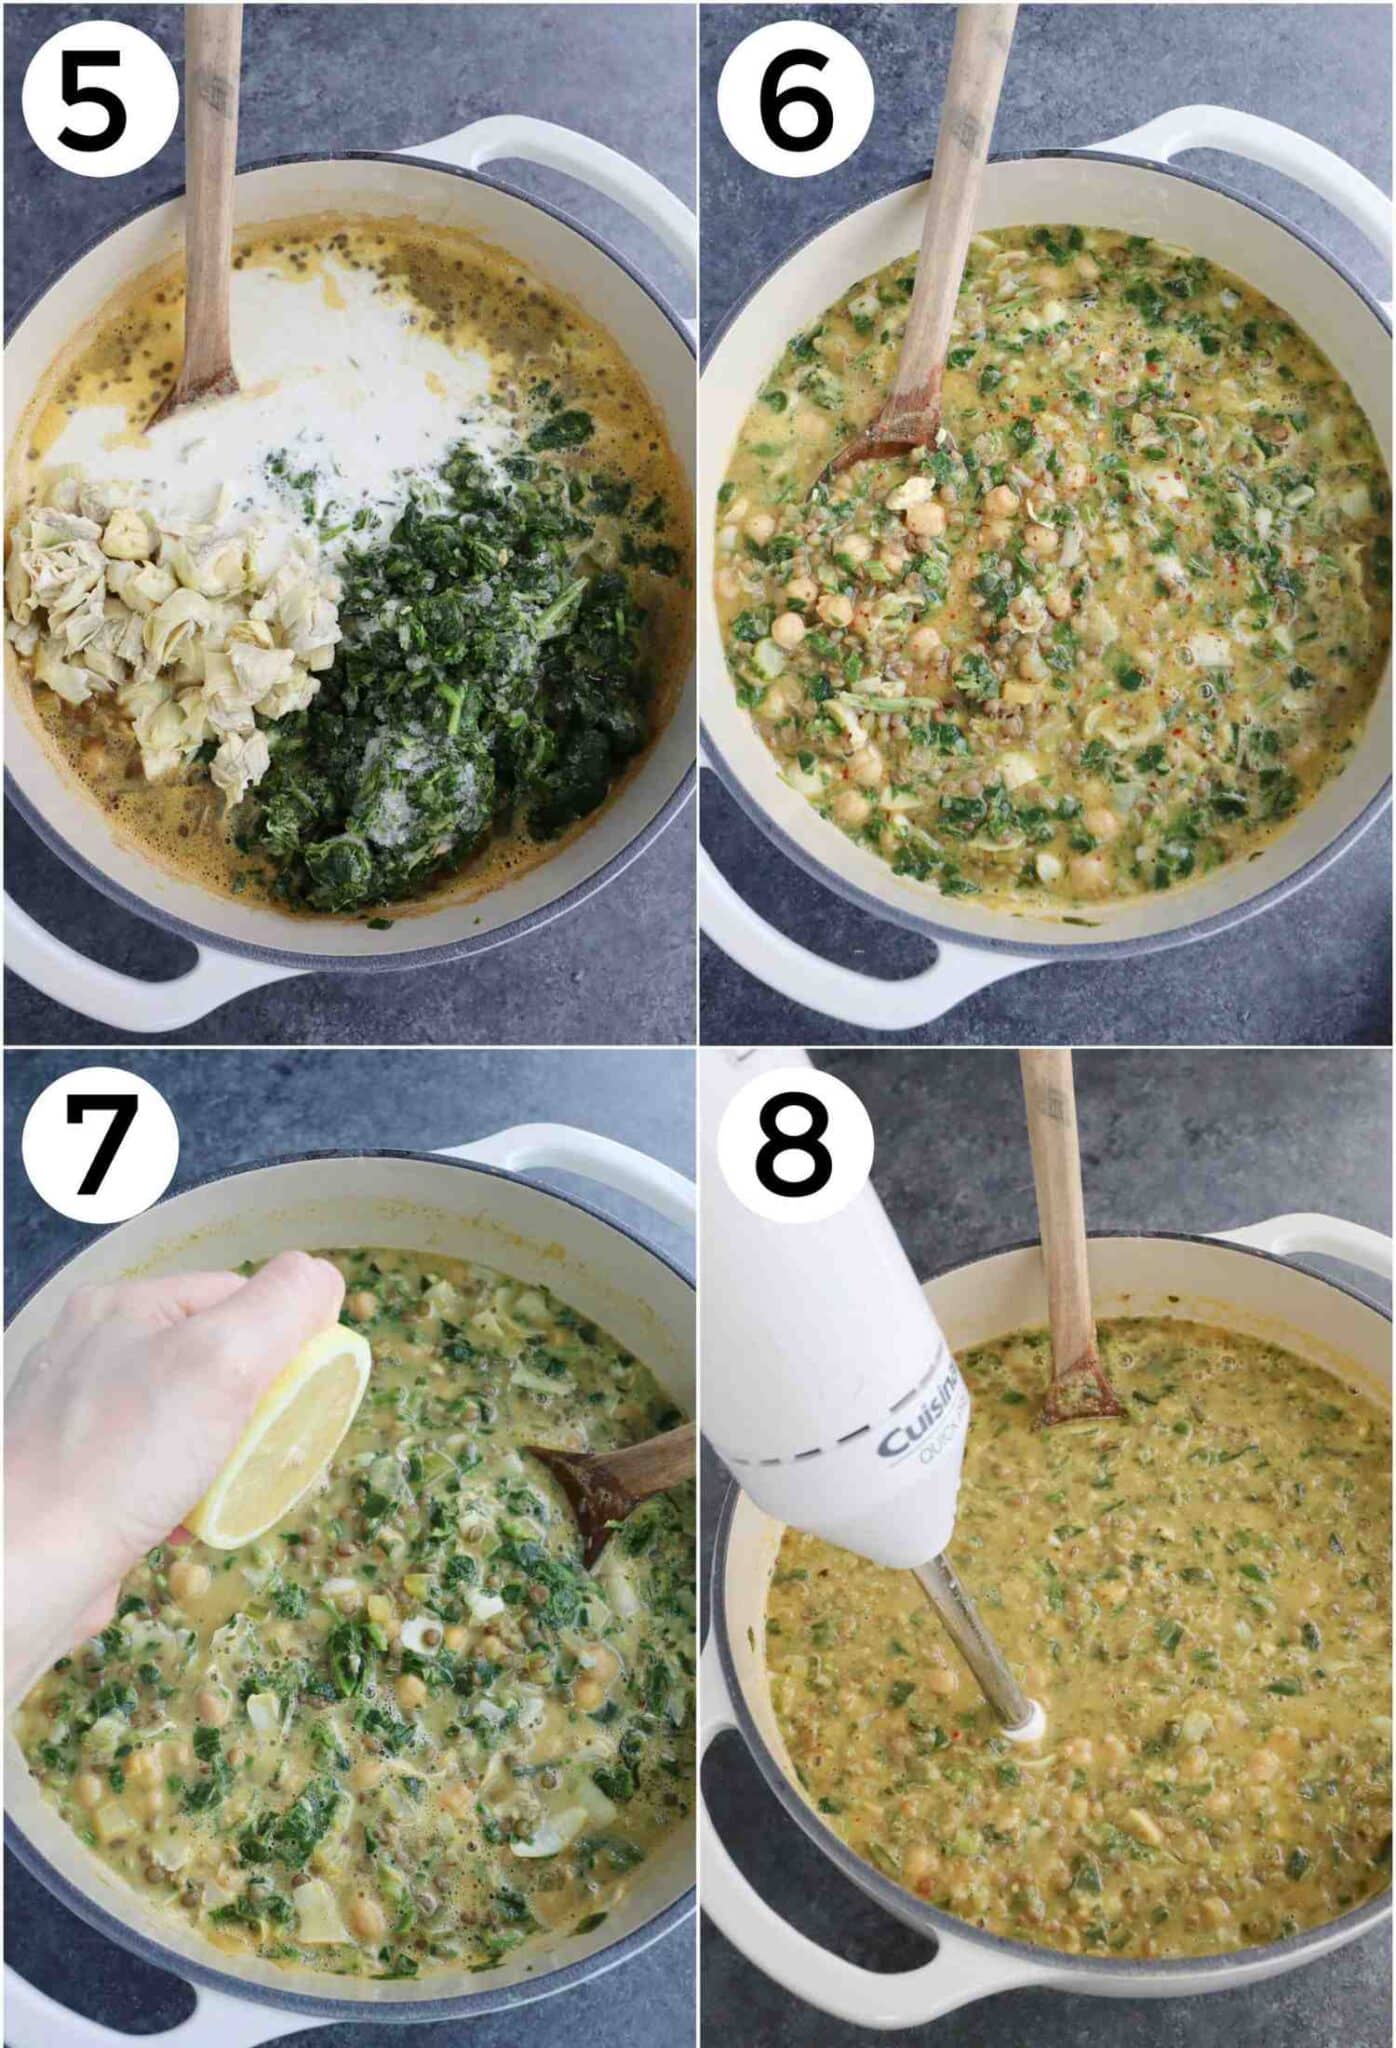 Steps 5-8 showing how to make vegan chickpea soup.